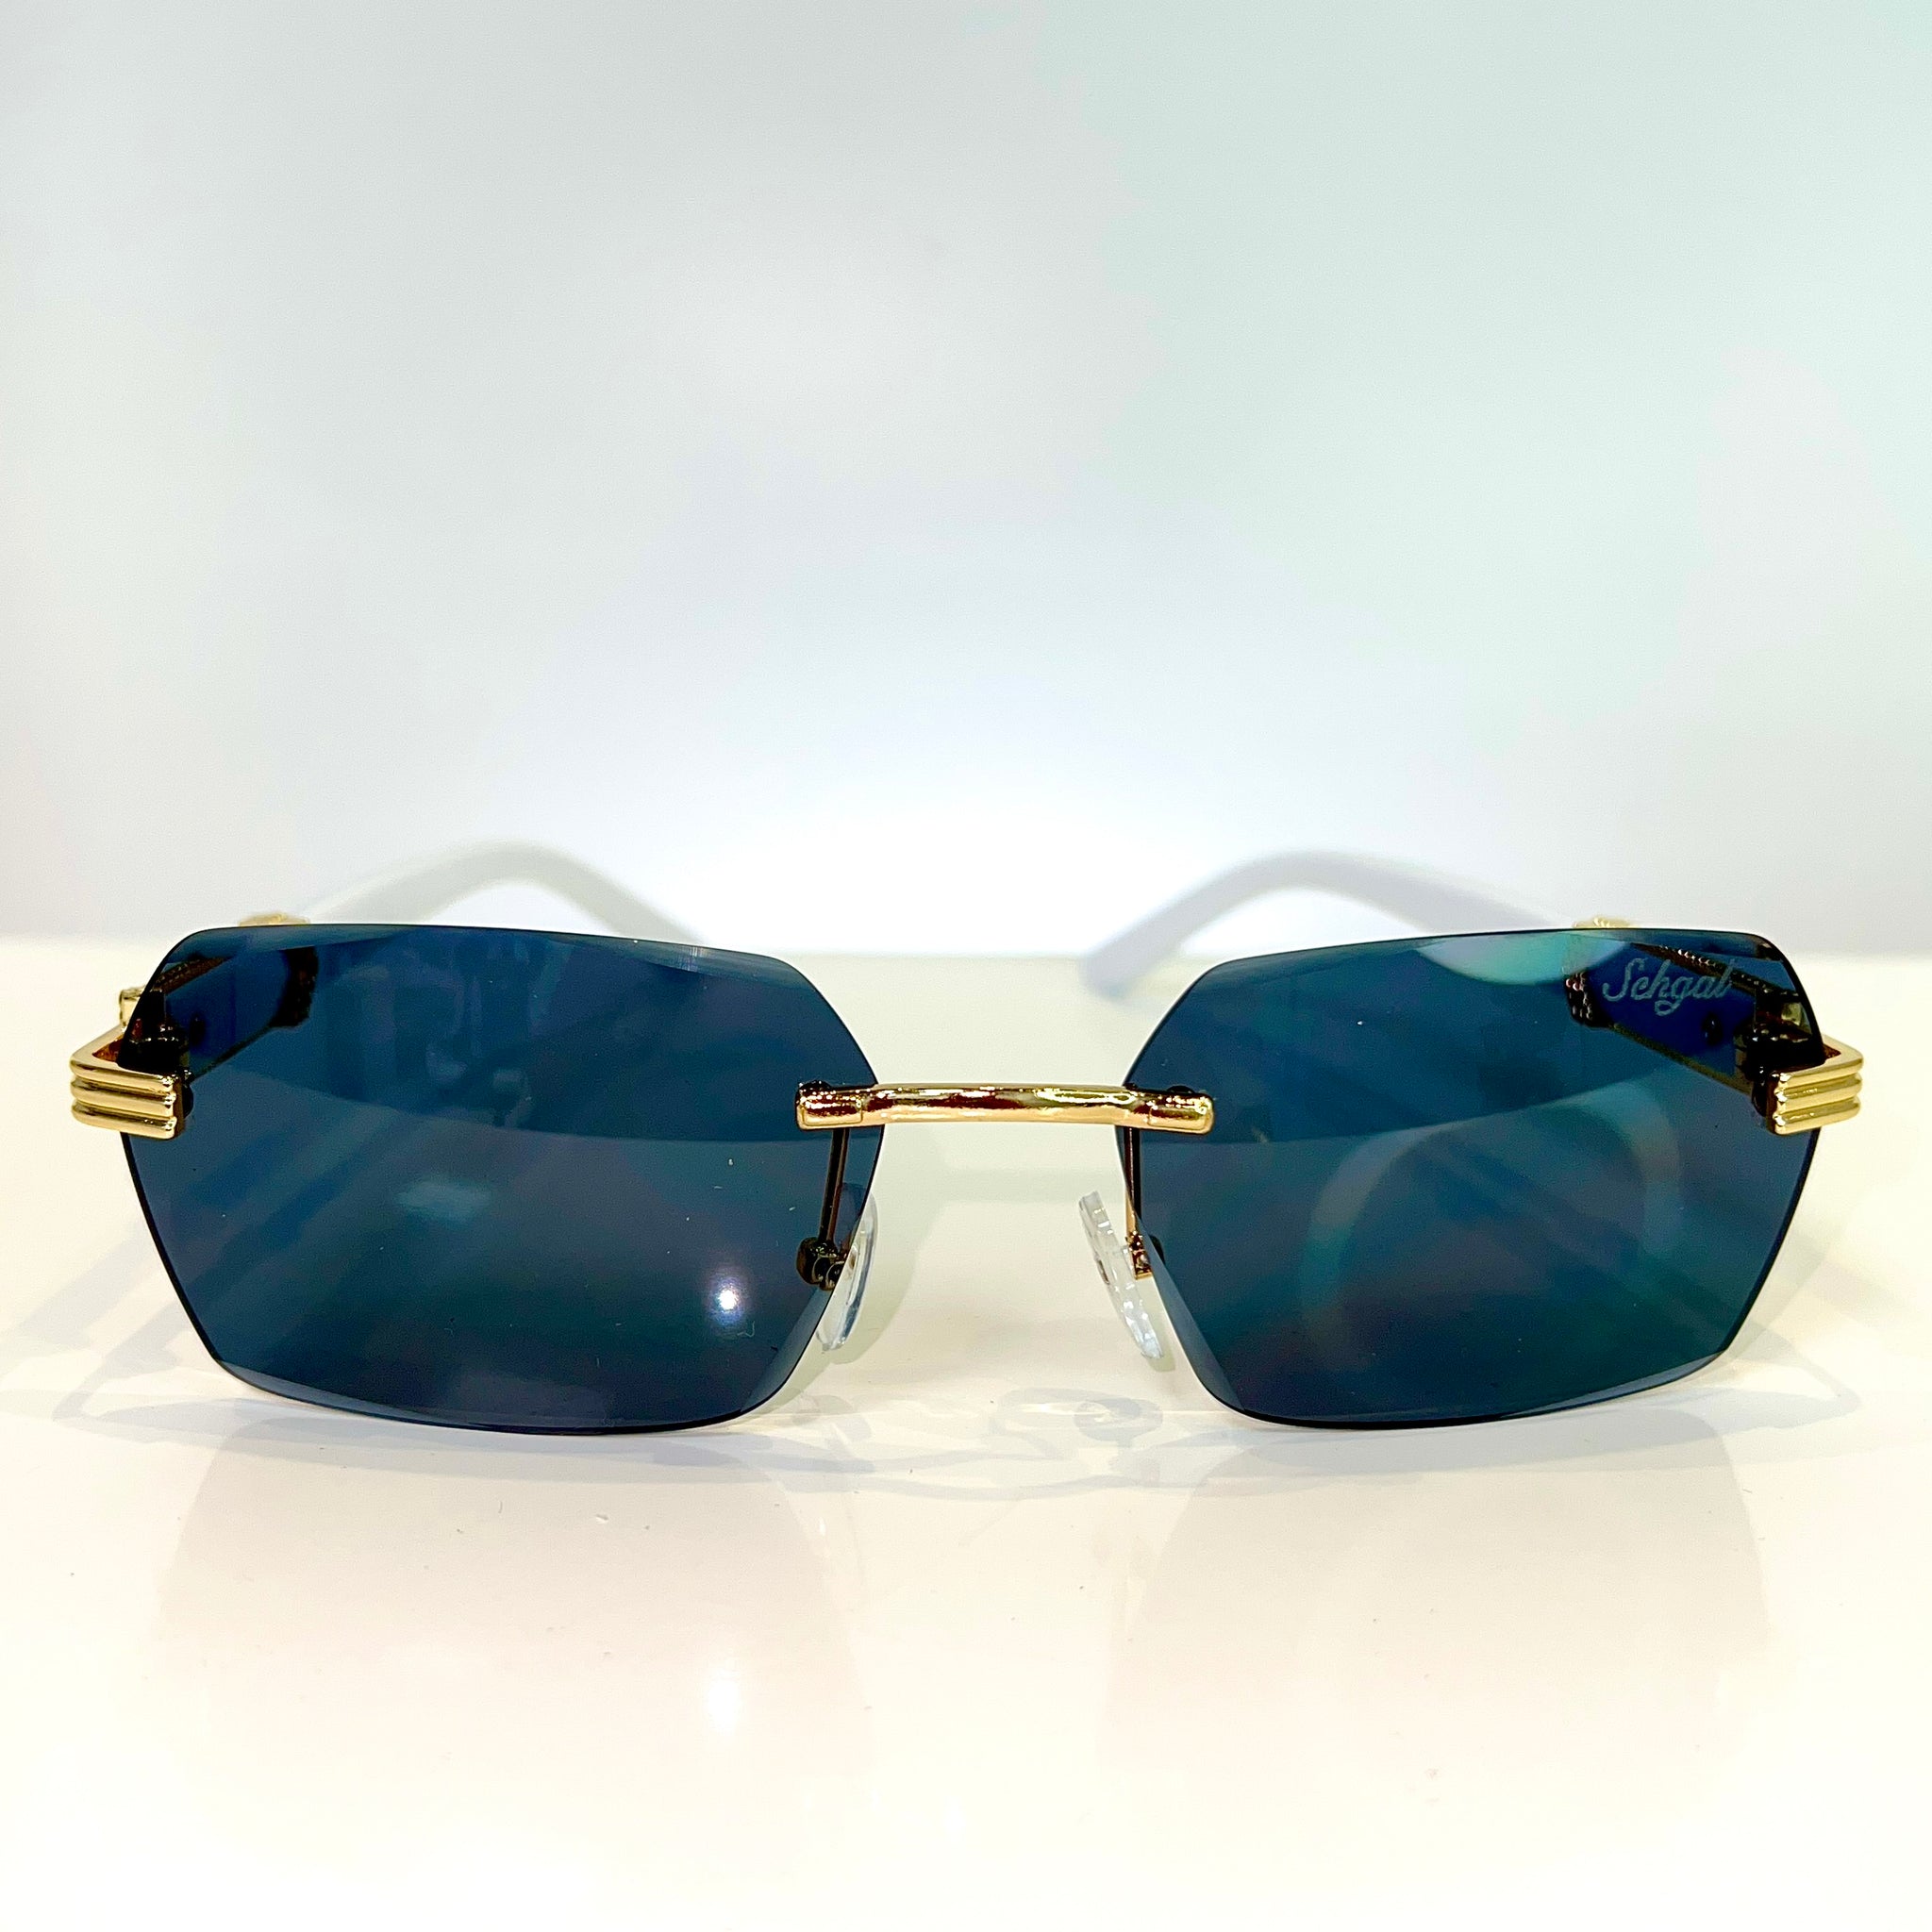 Marblecut Glasses - 14 carat gold plated - Black shade